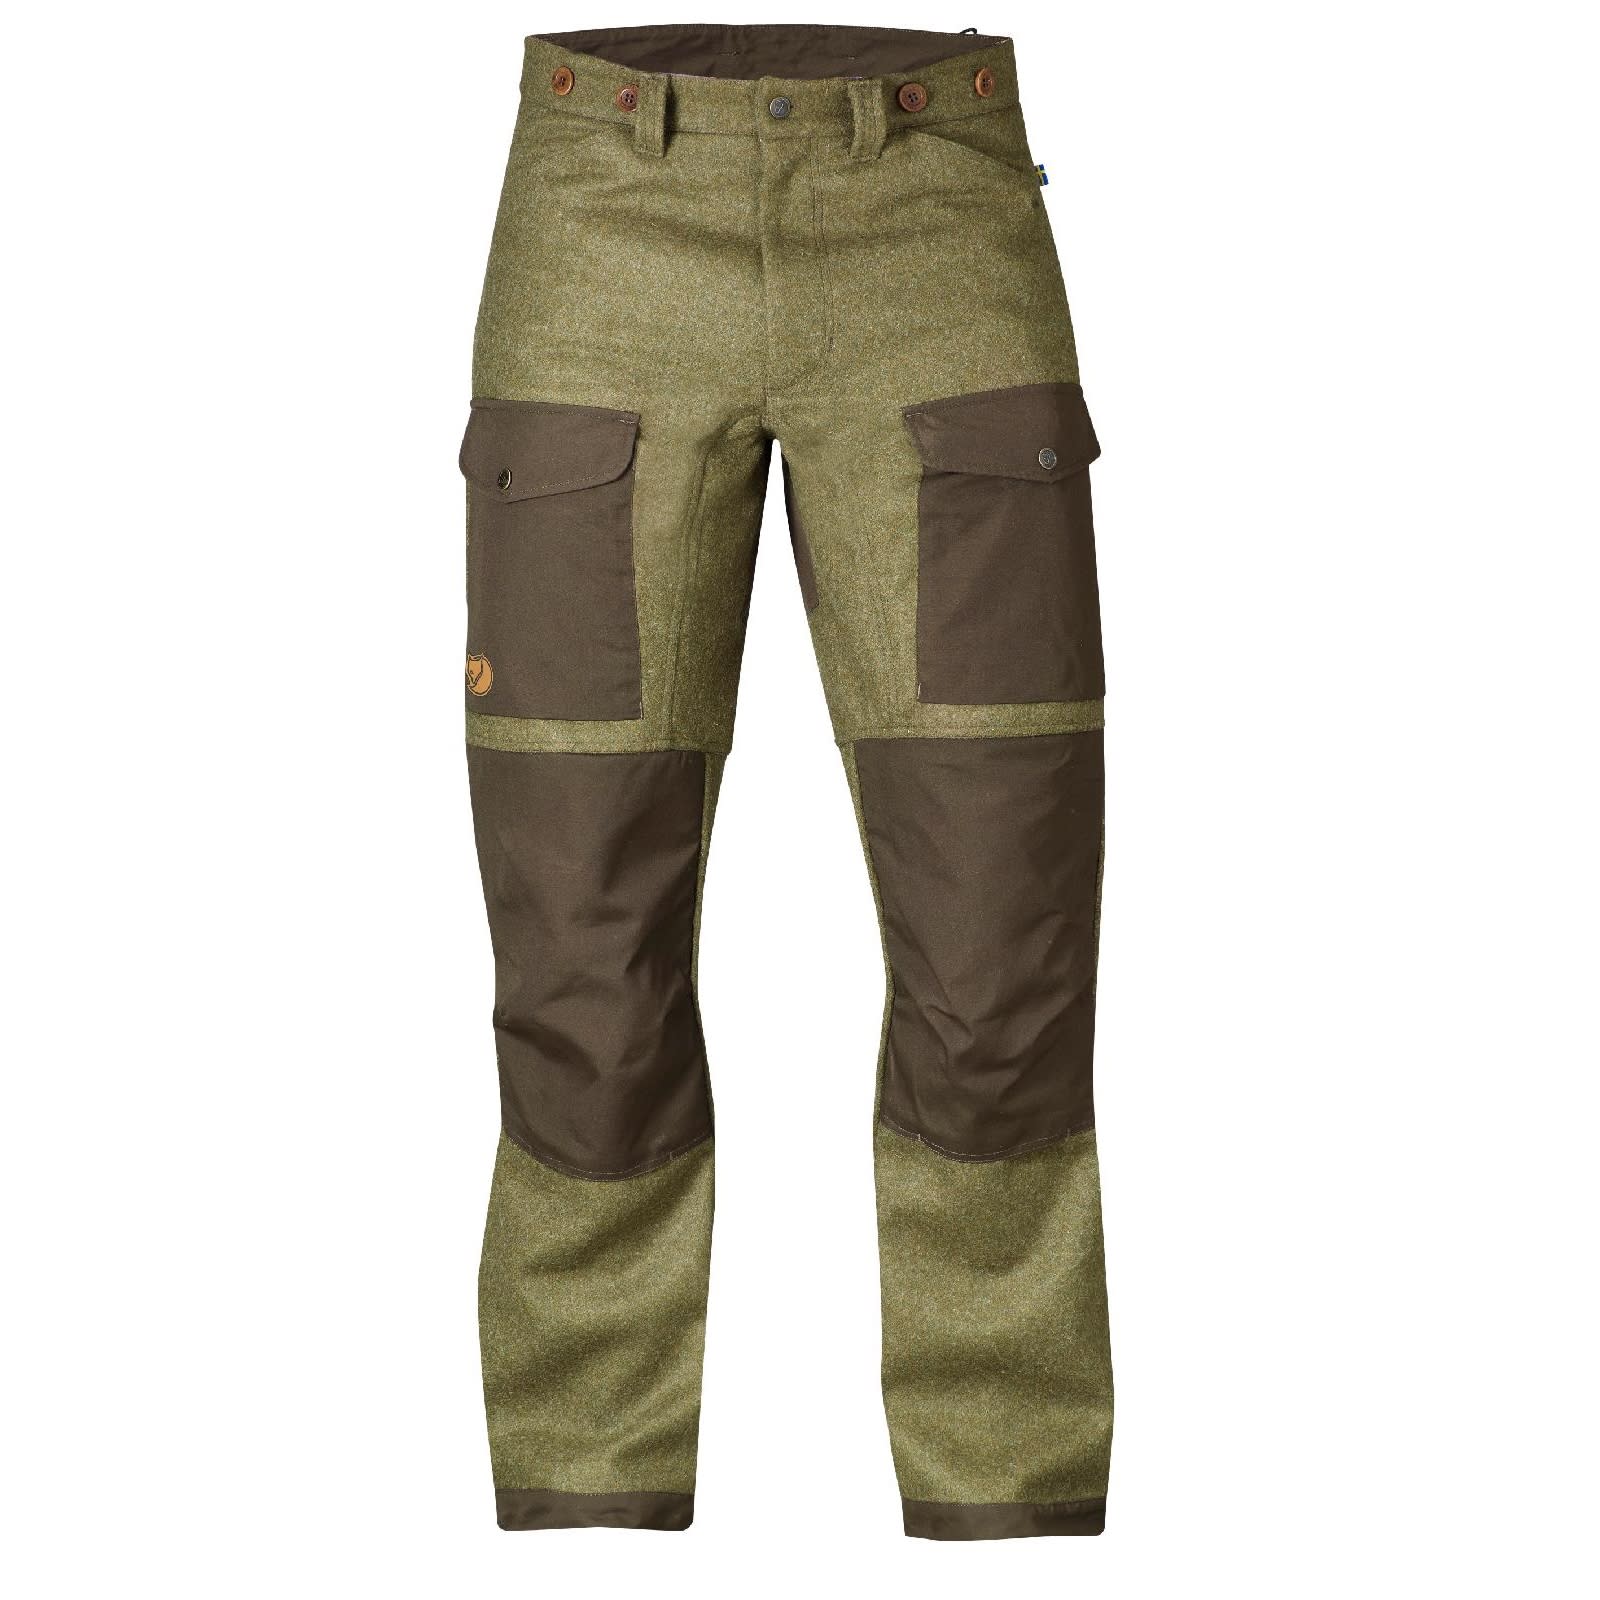 Buy Fjällräven Forest Numbers Trousers from Outnorth برنامج سماعة هواوي